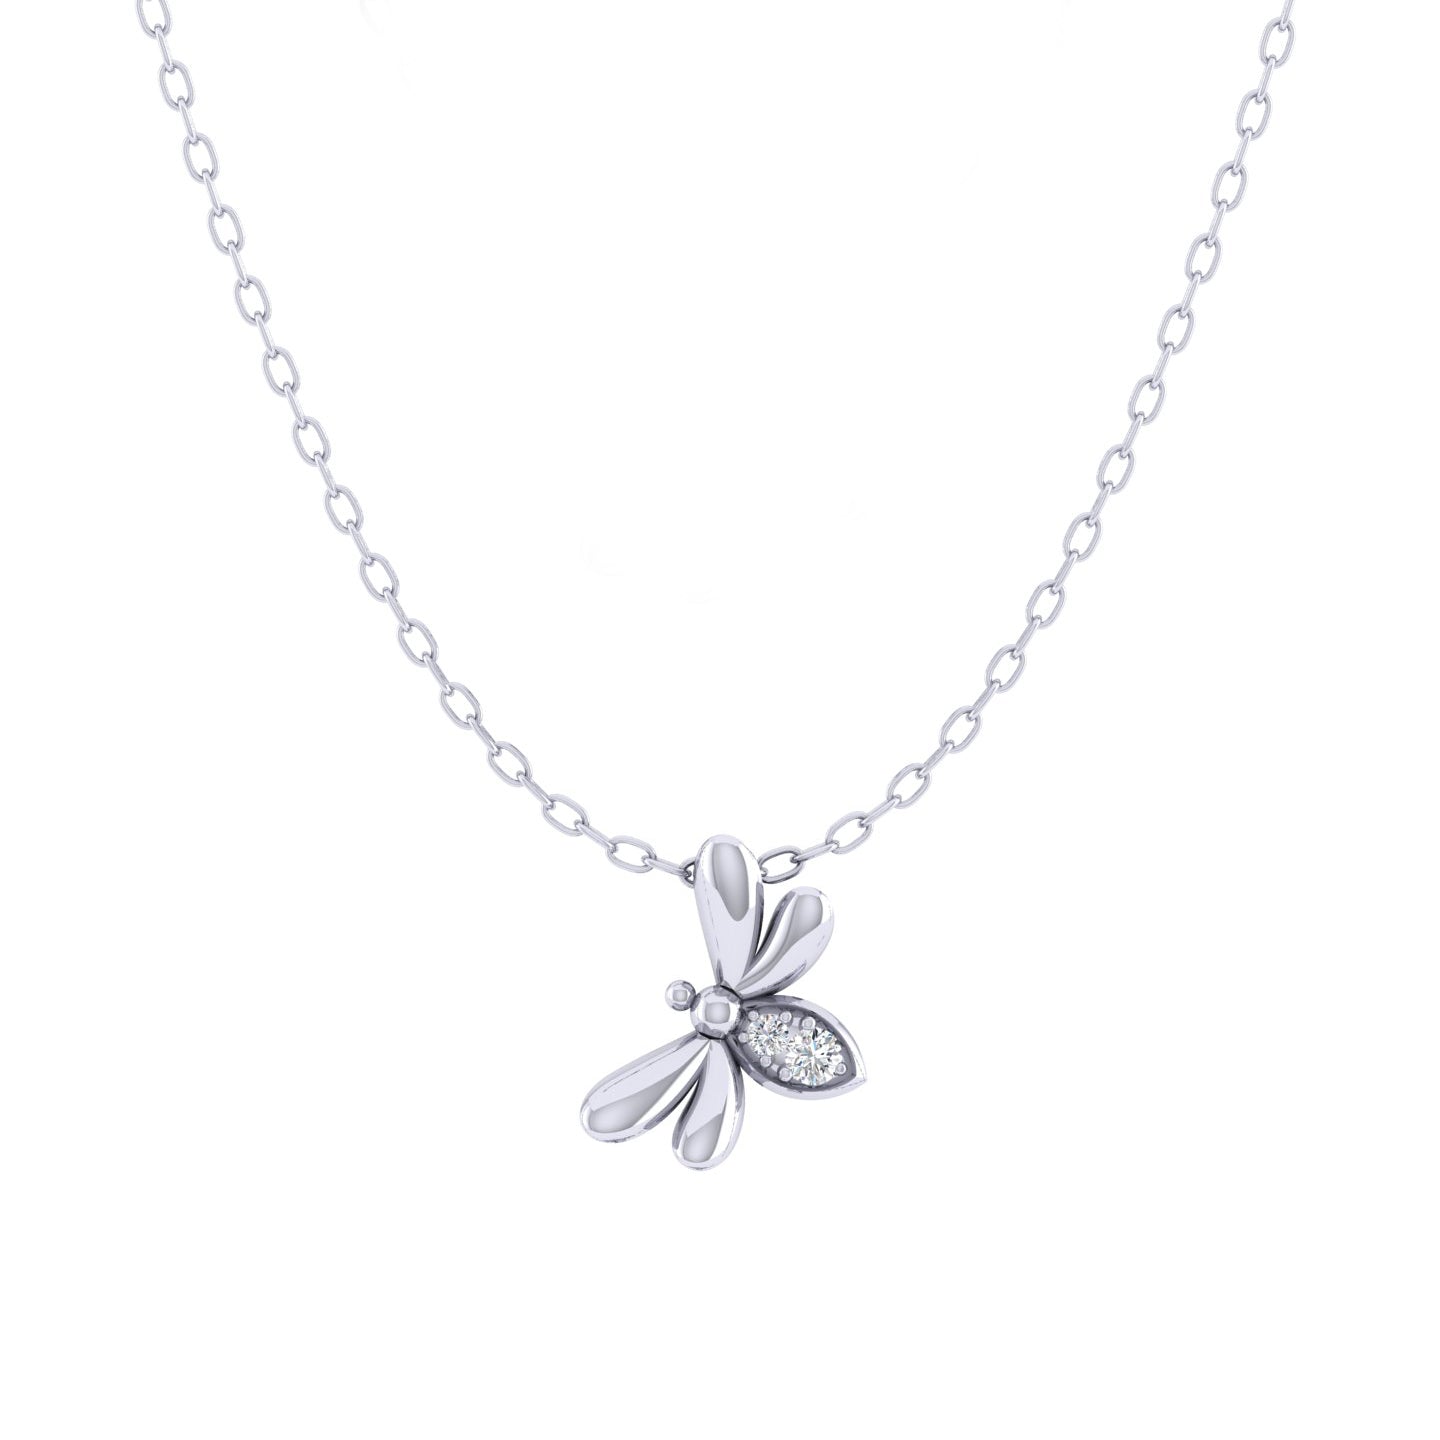 Bee 1/40 Cttw Natural Diamond Pendant Necklace set in 925 Sterling Silver